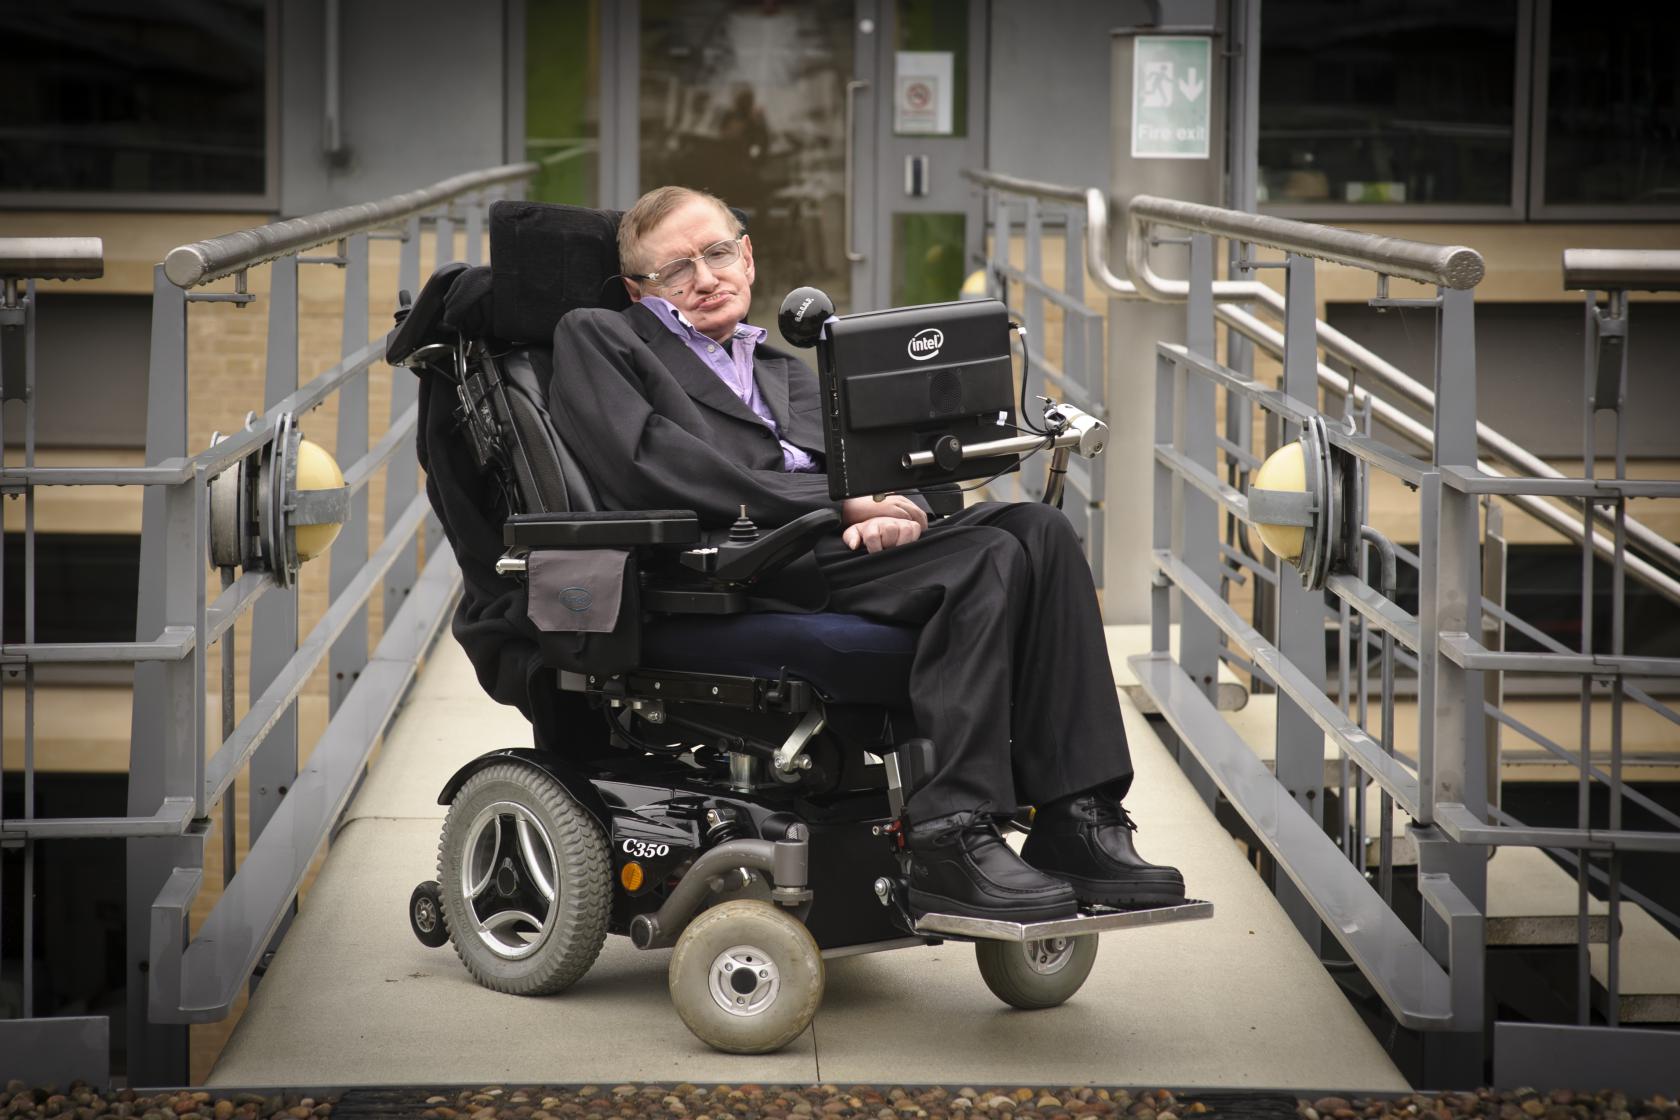 Stephen Hawking: the extraordinary scientist who changed our understanding of physics